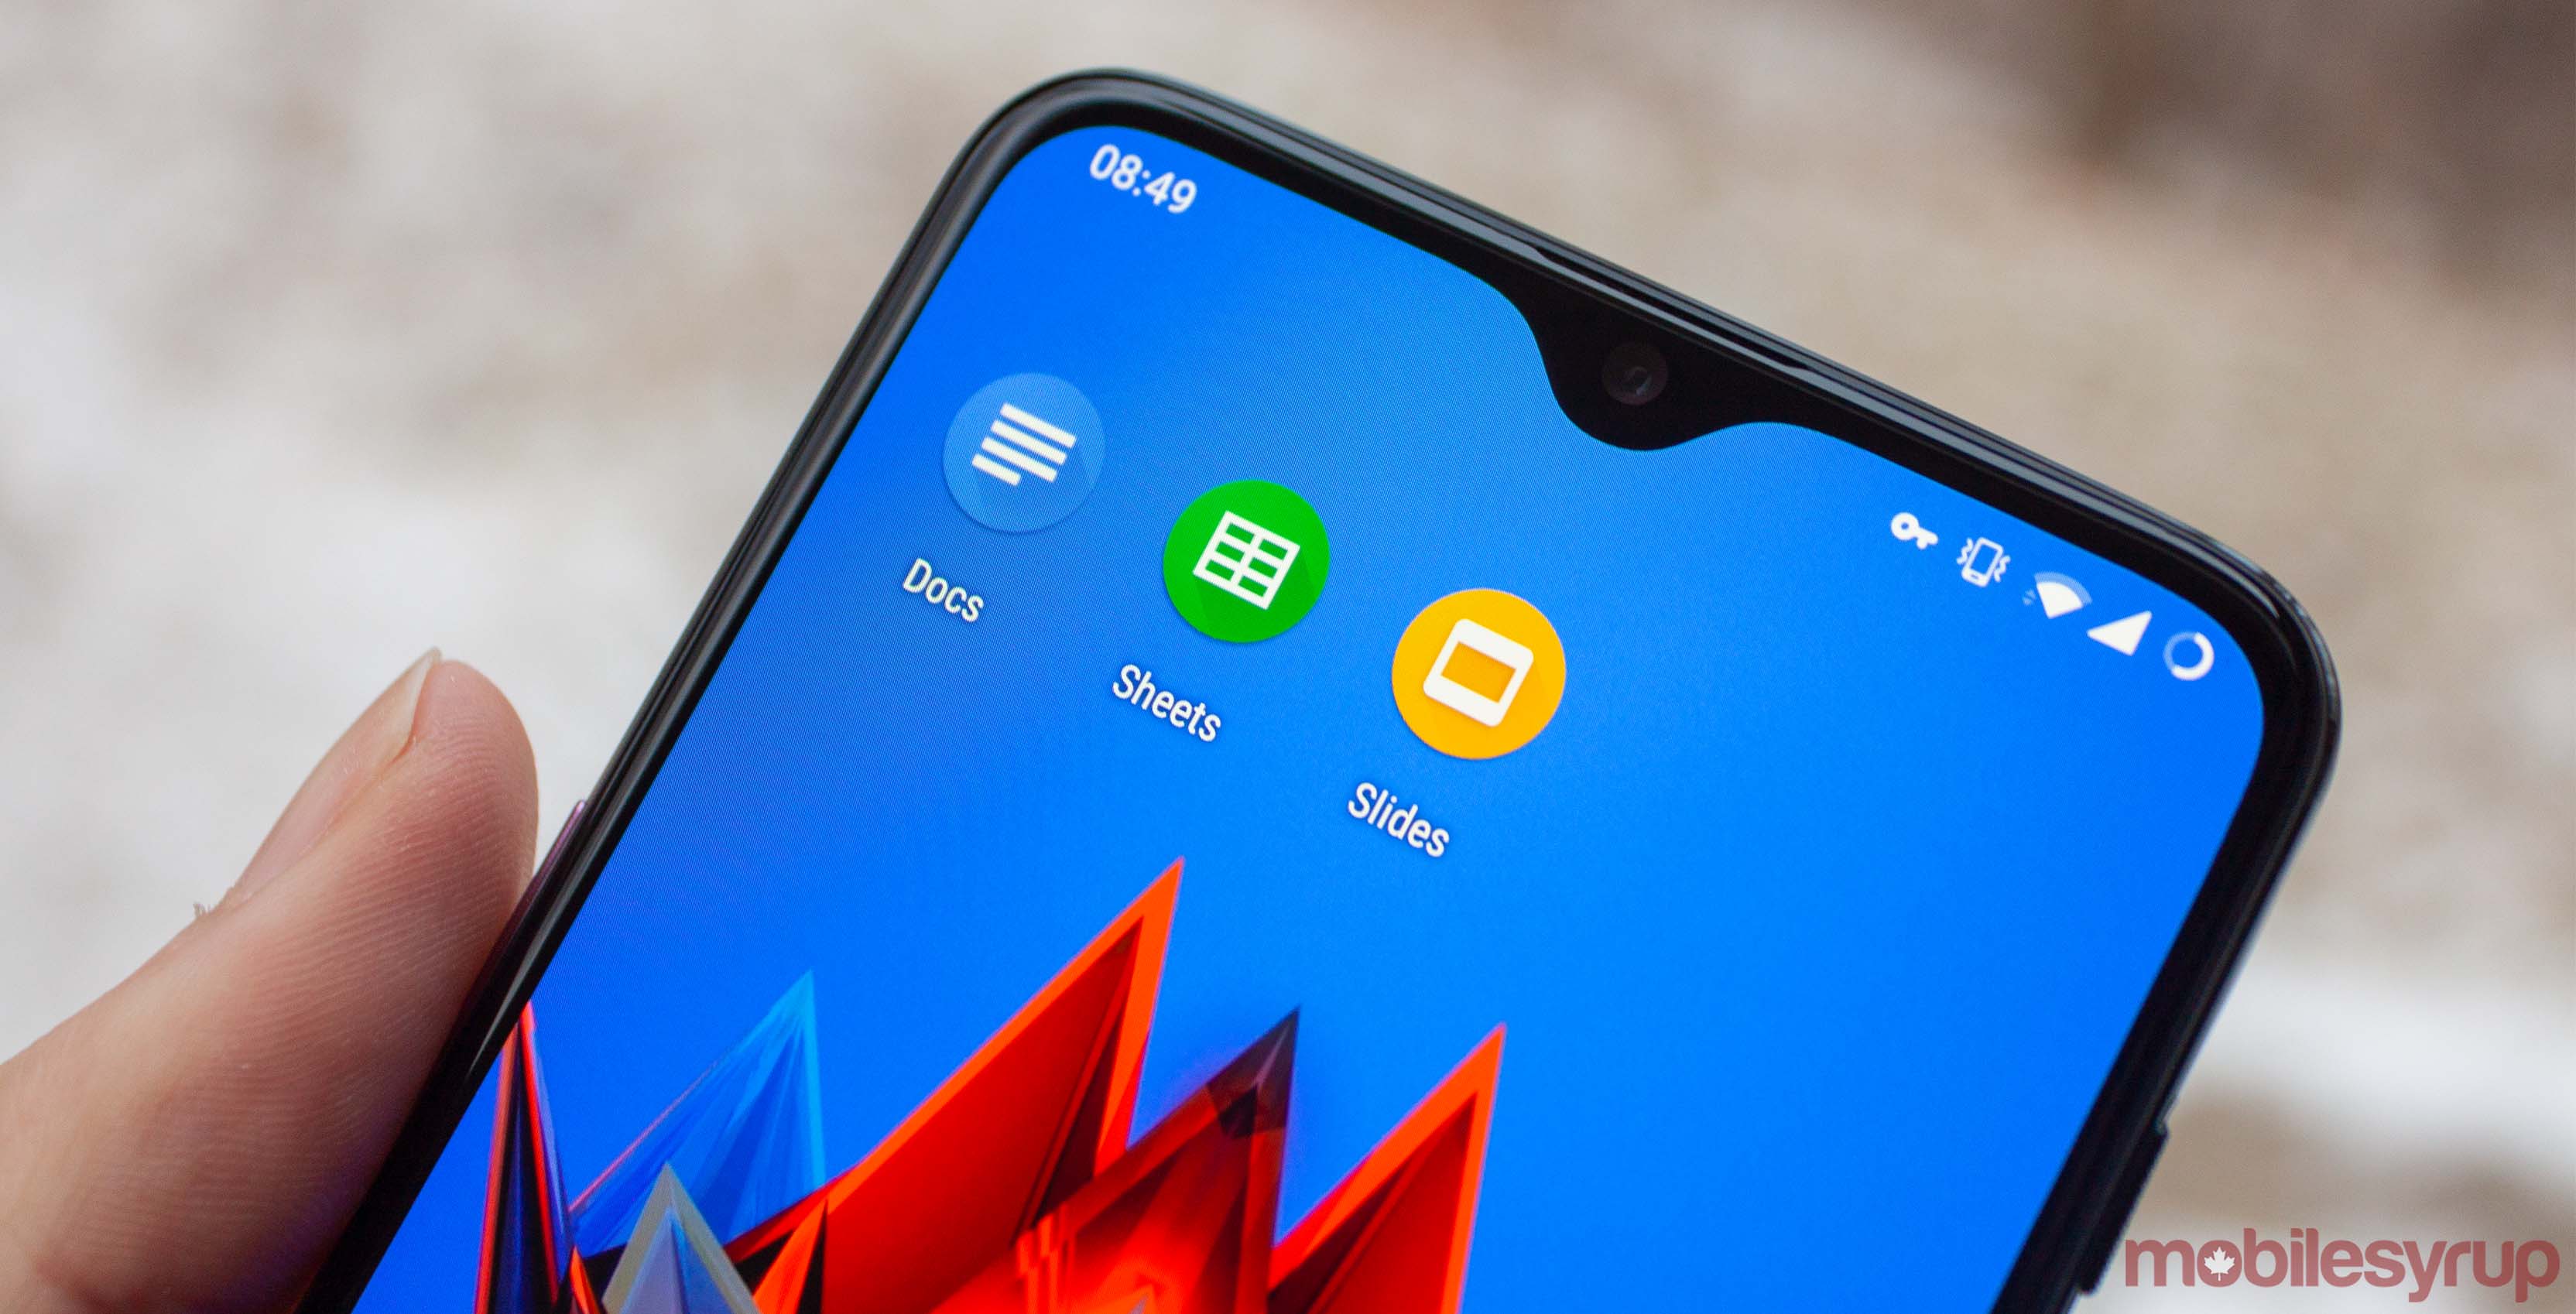 Google Docs, Sheets and Slides on OnePlus 6T